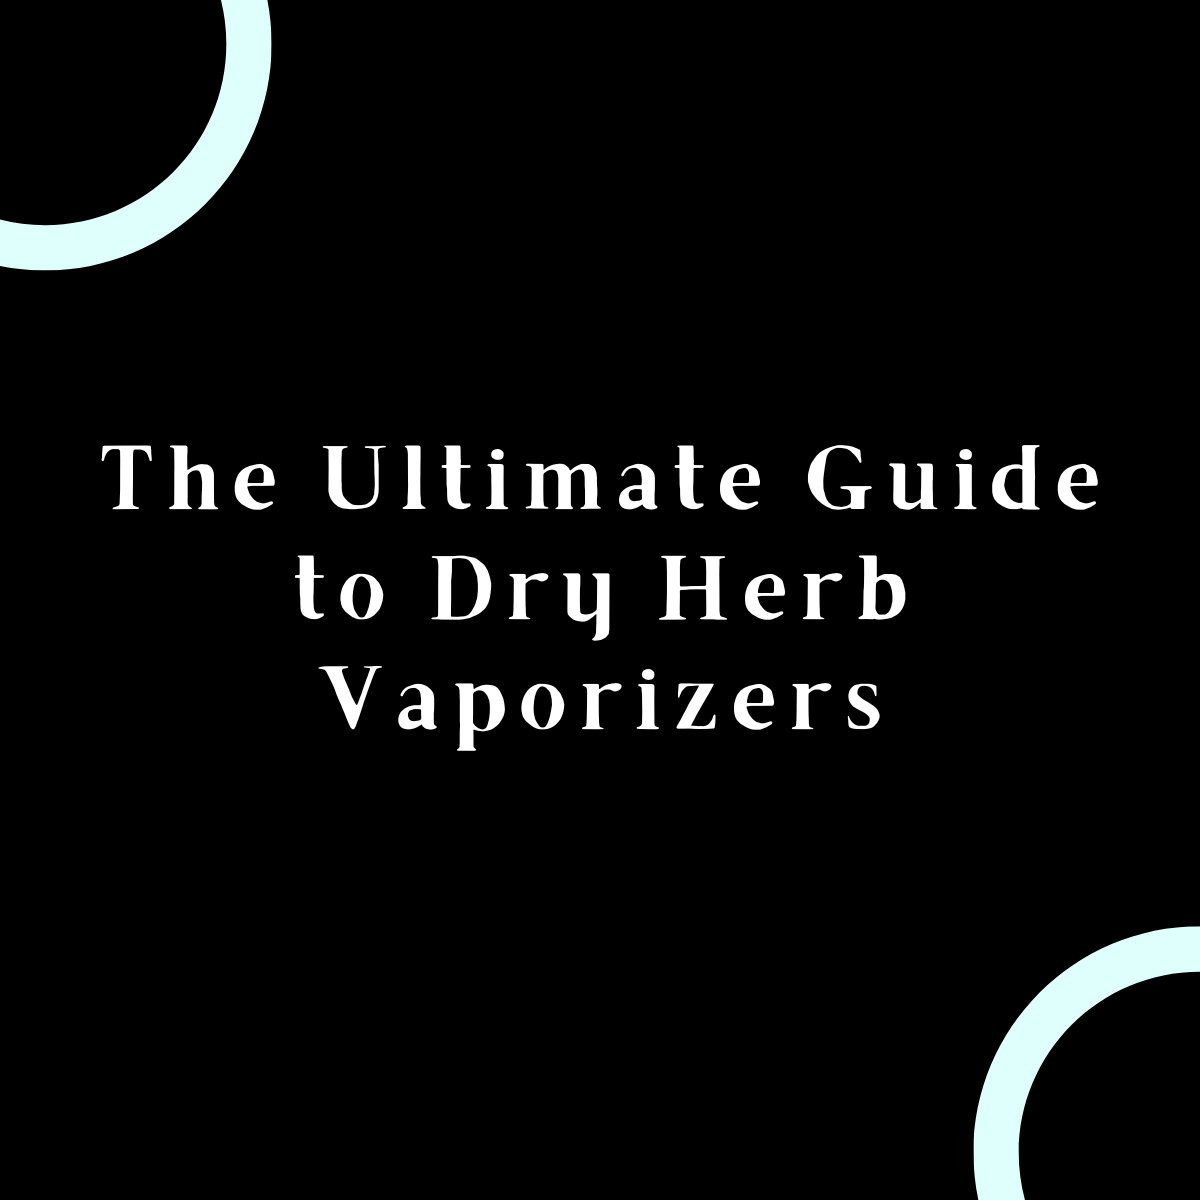 The Ultimate Guide to Dry Herb Vaporizers